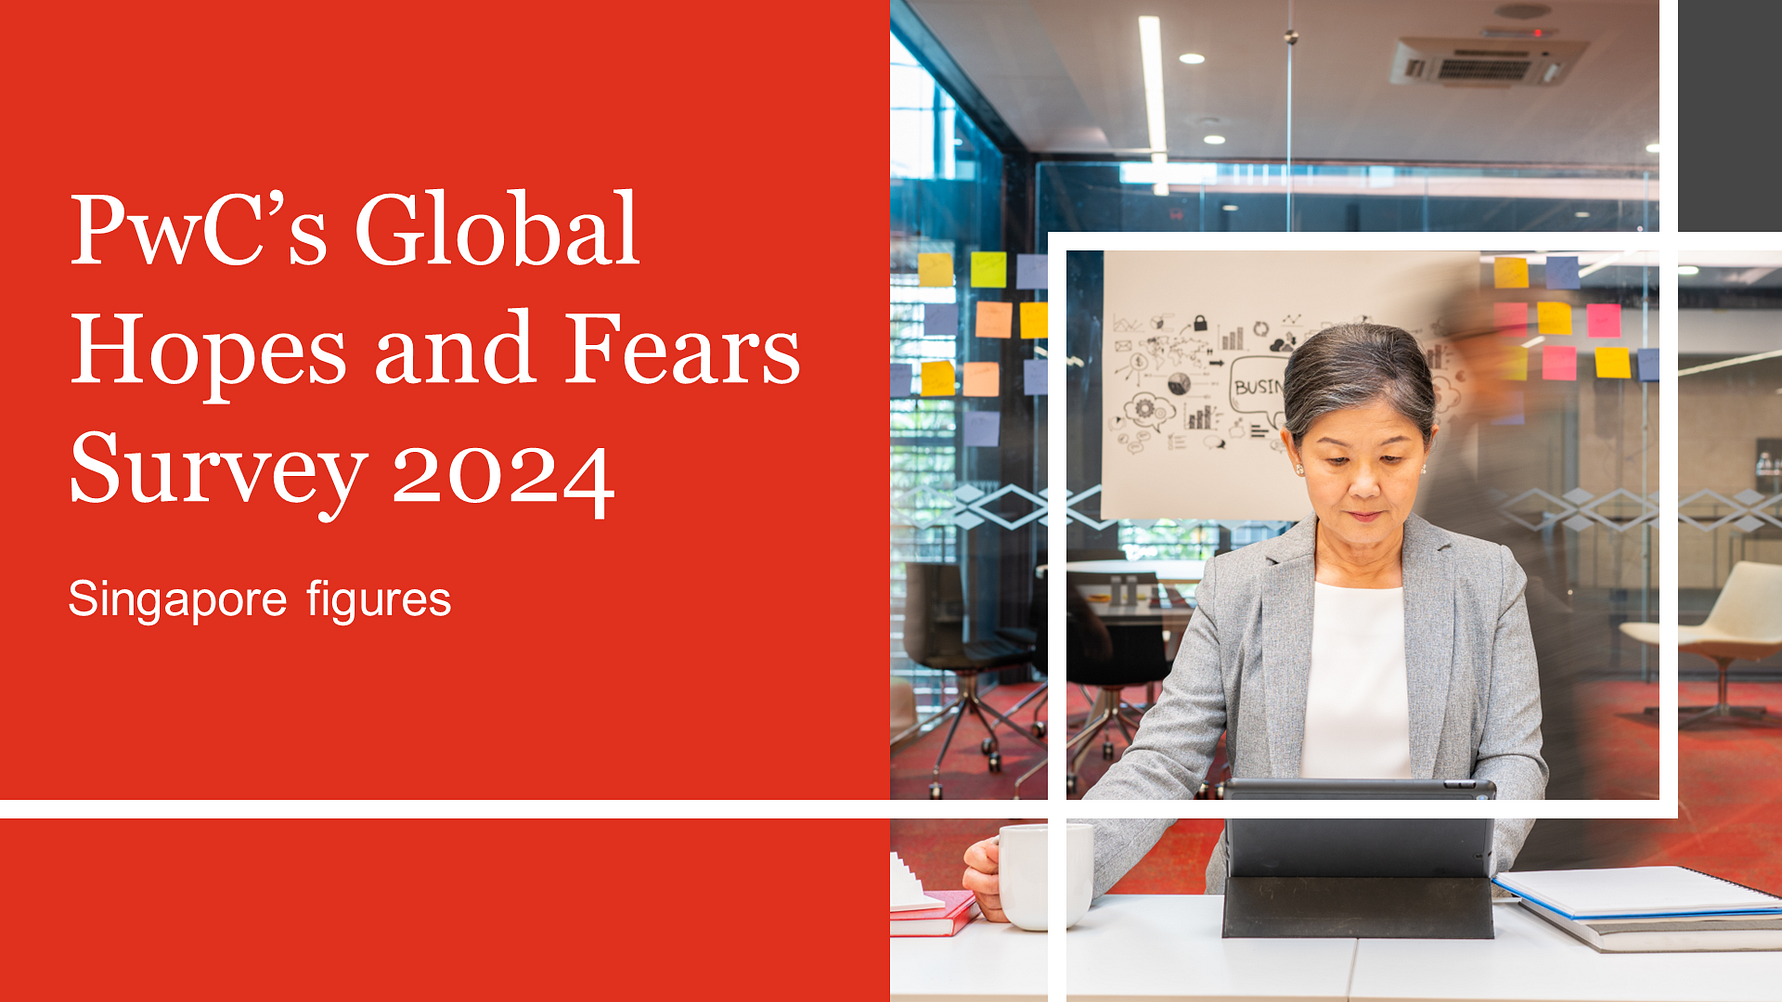 Workers in Singapore embrace AI and prioritise skills growth amid rising workloads and an accelerating pace of change: PwC's 2024 Global Workforce Hopes & Fears Survey